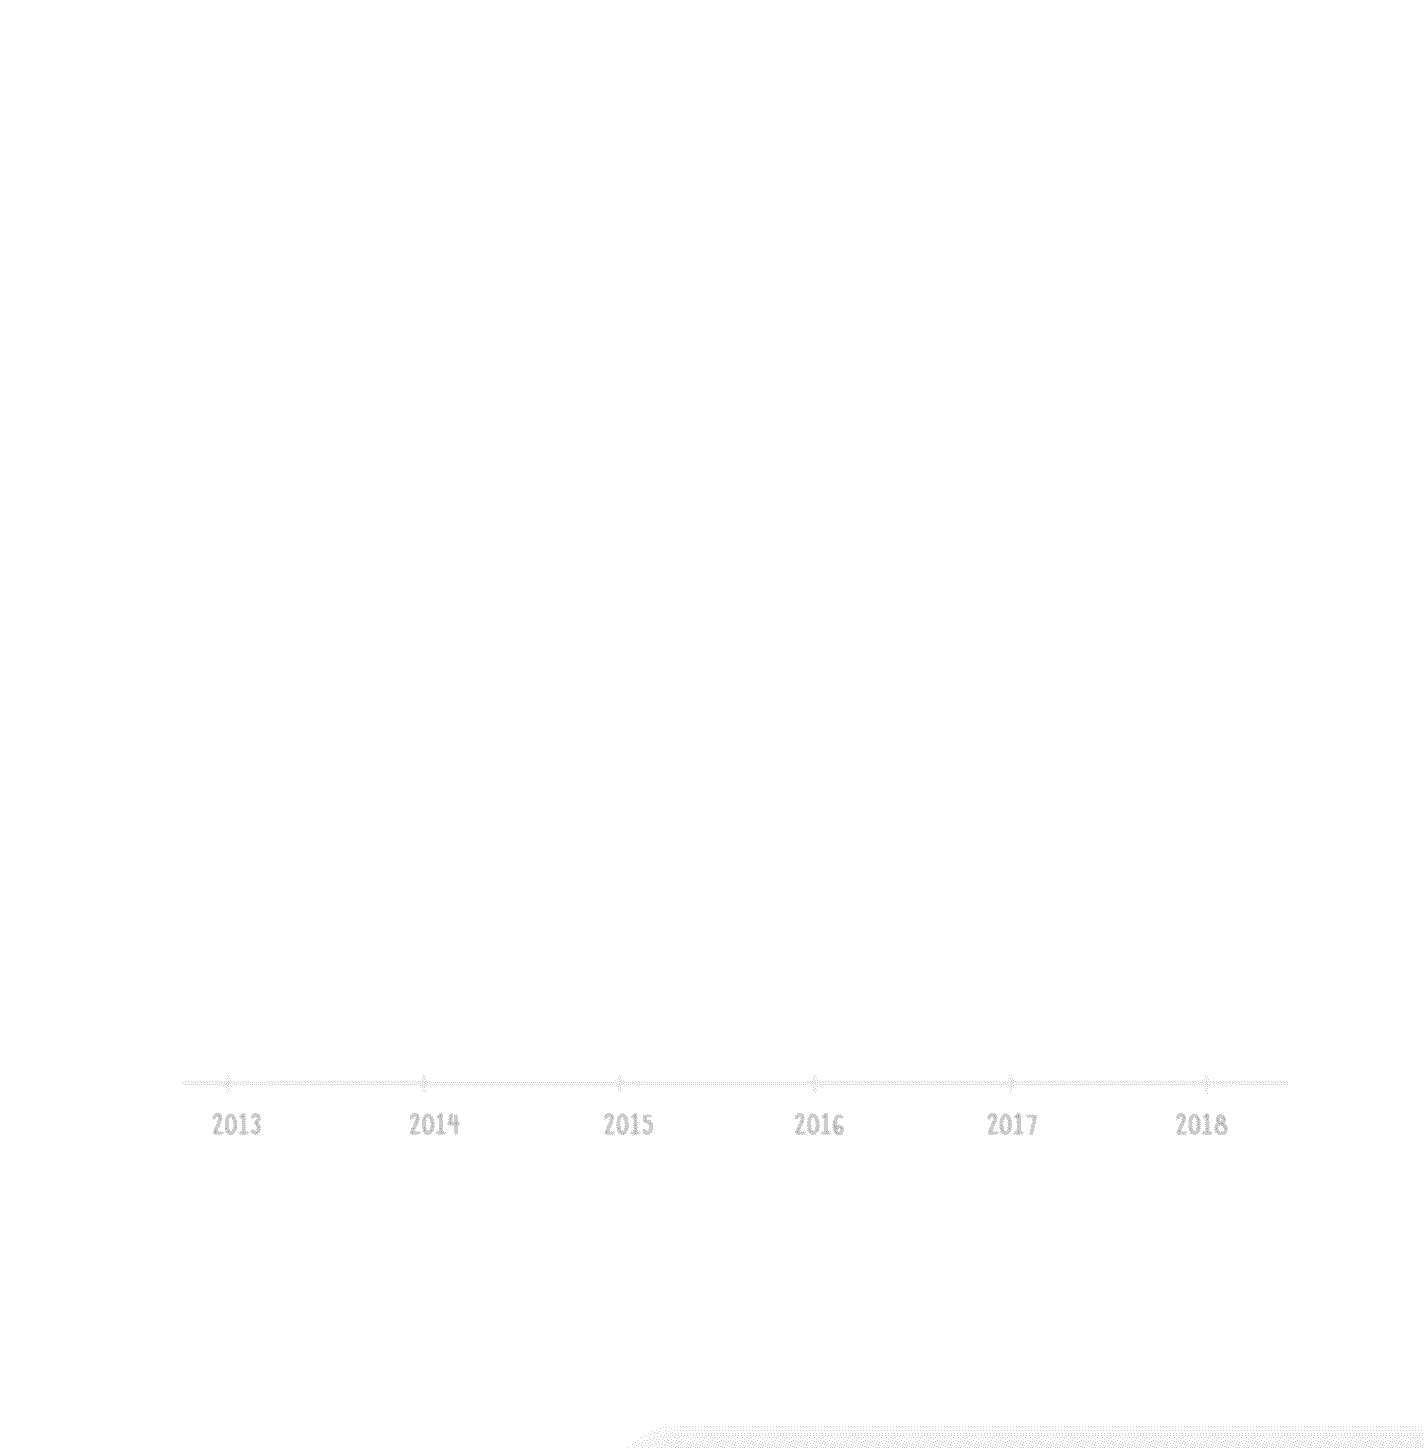 Graph of our sales over 5 years